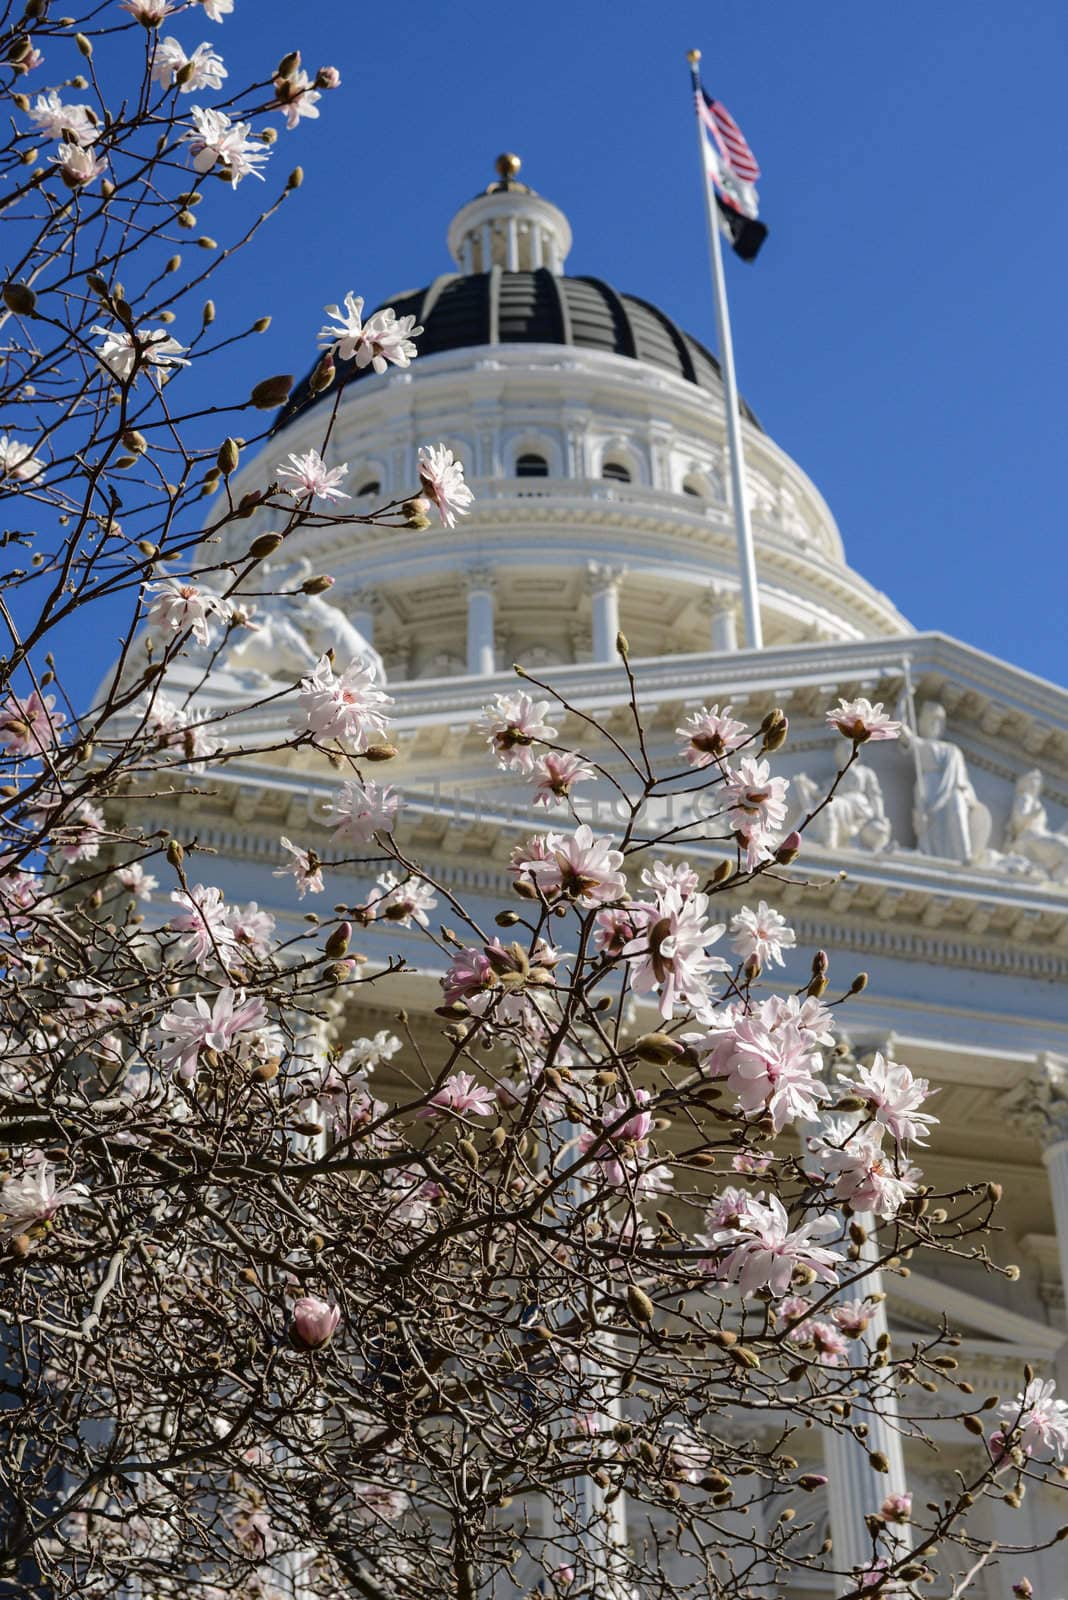 Spring Flowers at the California State Capitol by bbourdages